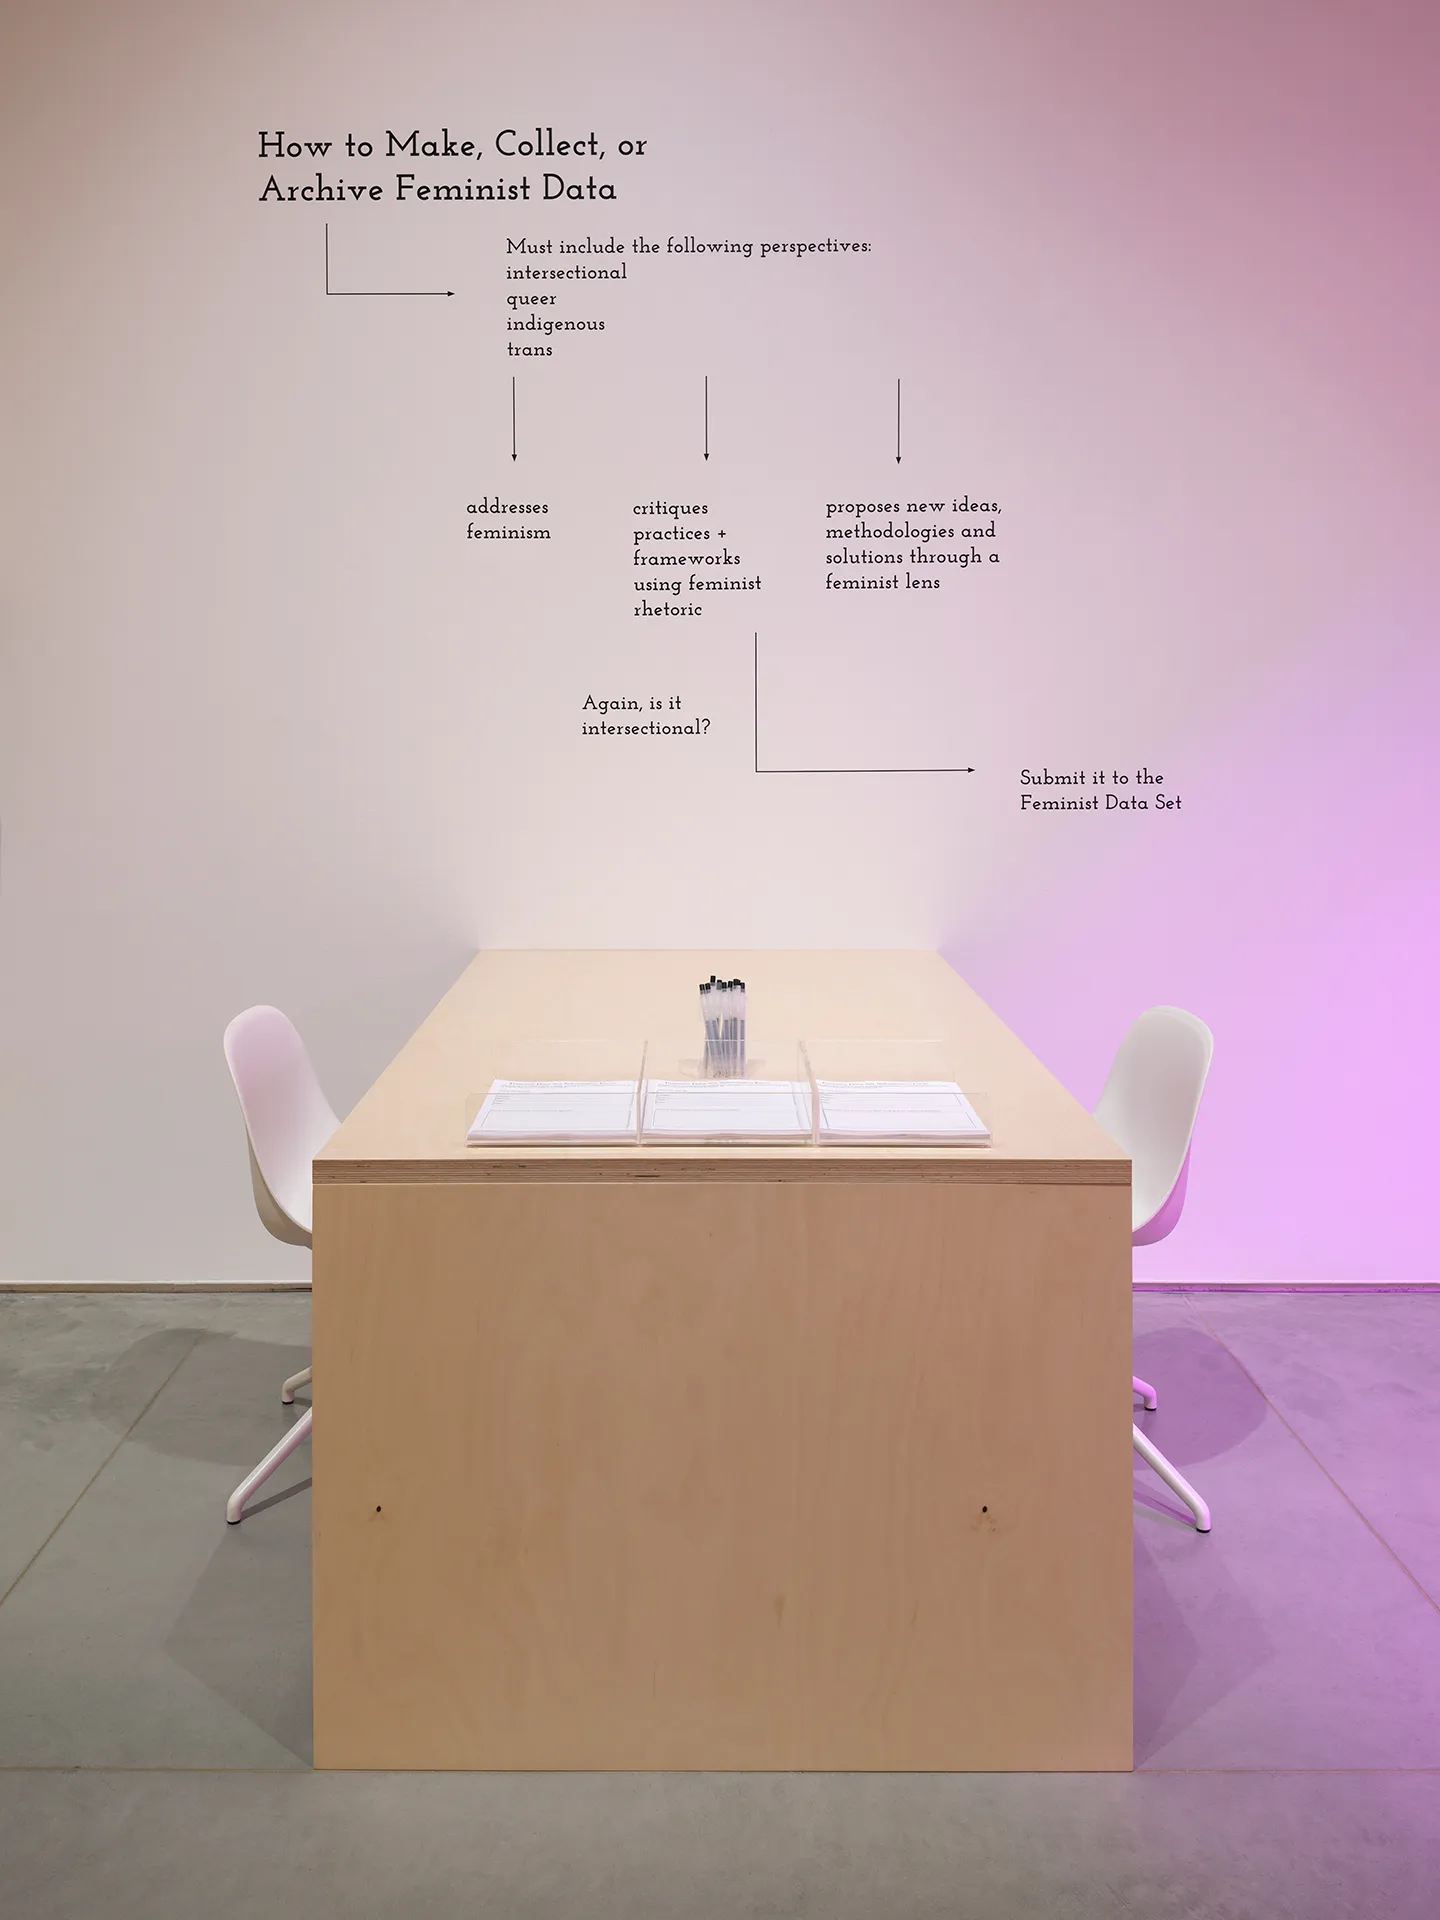 Gallery interior with a wooden table pushed against a white wall. There are white chairs on either side of the table. A diagram on the wall above the table is labeled “How to Make, Collect, or Archive Feminist Data.”